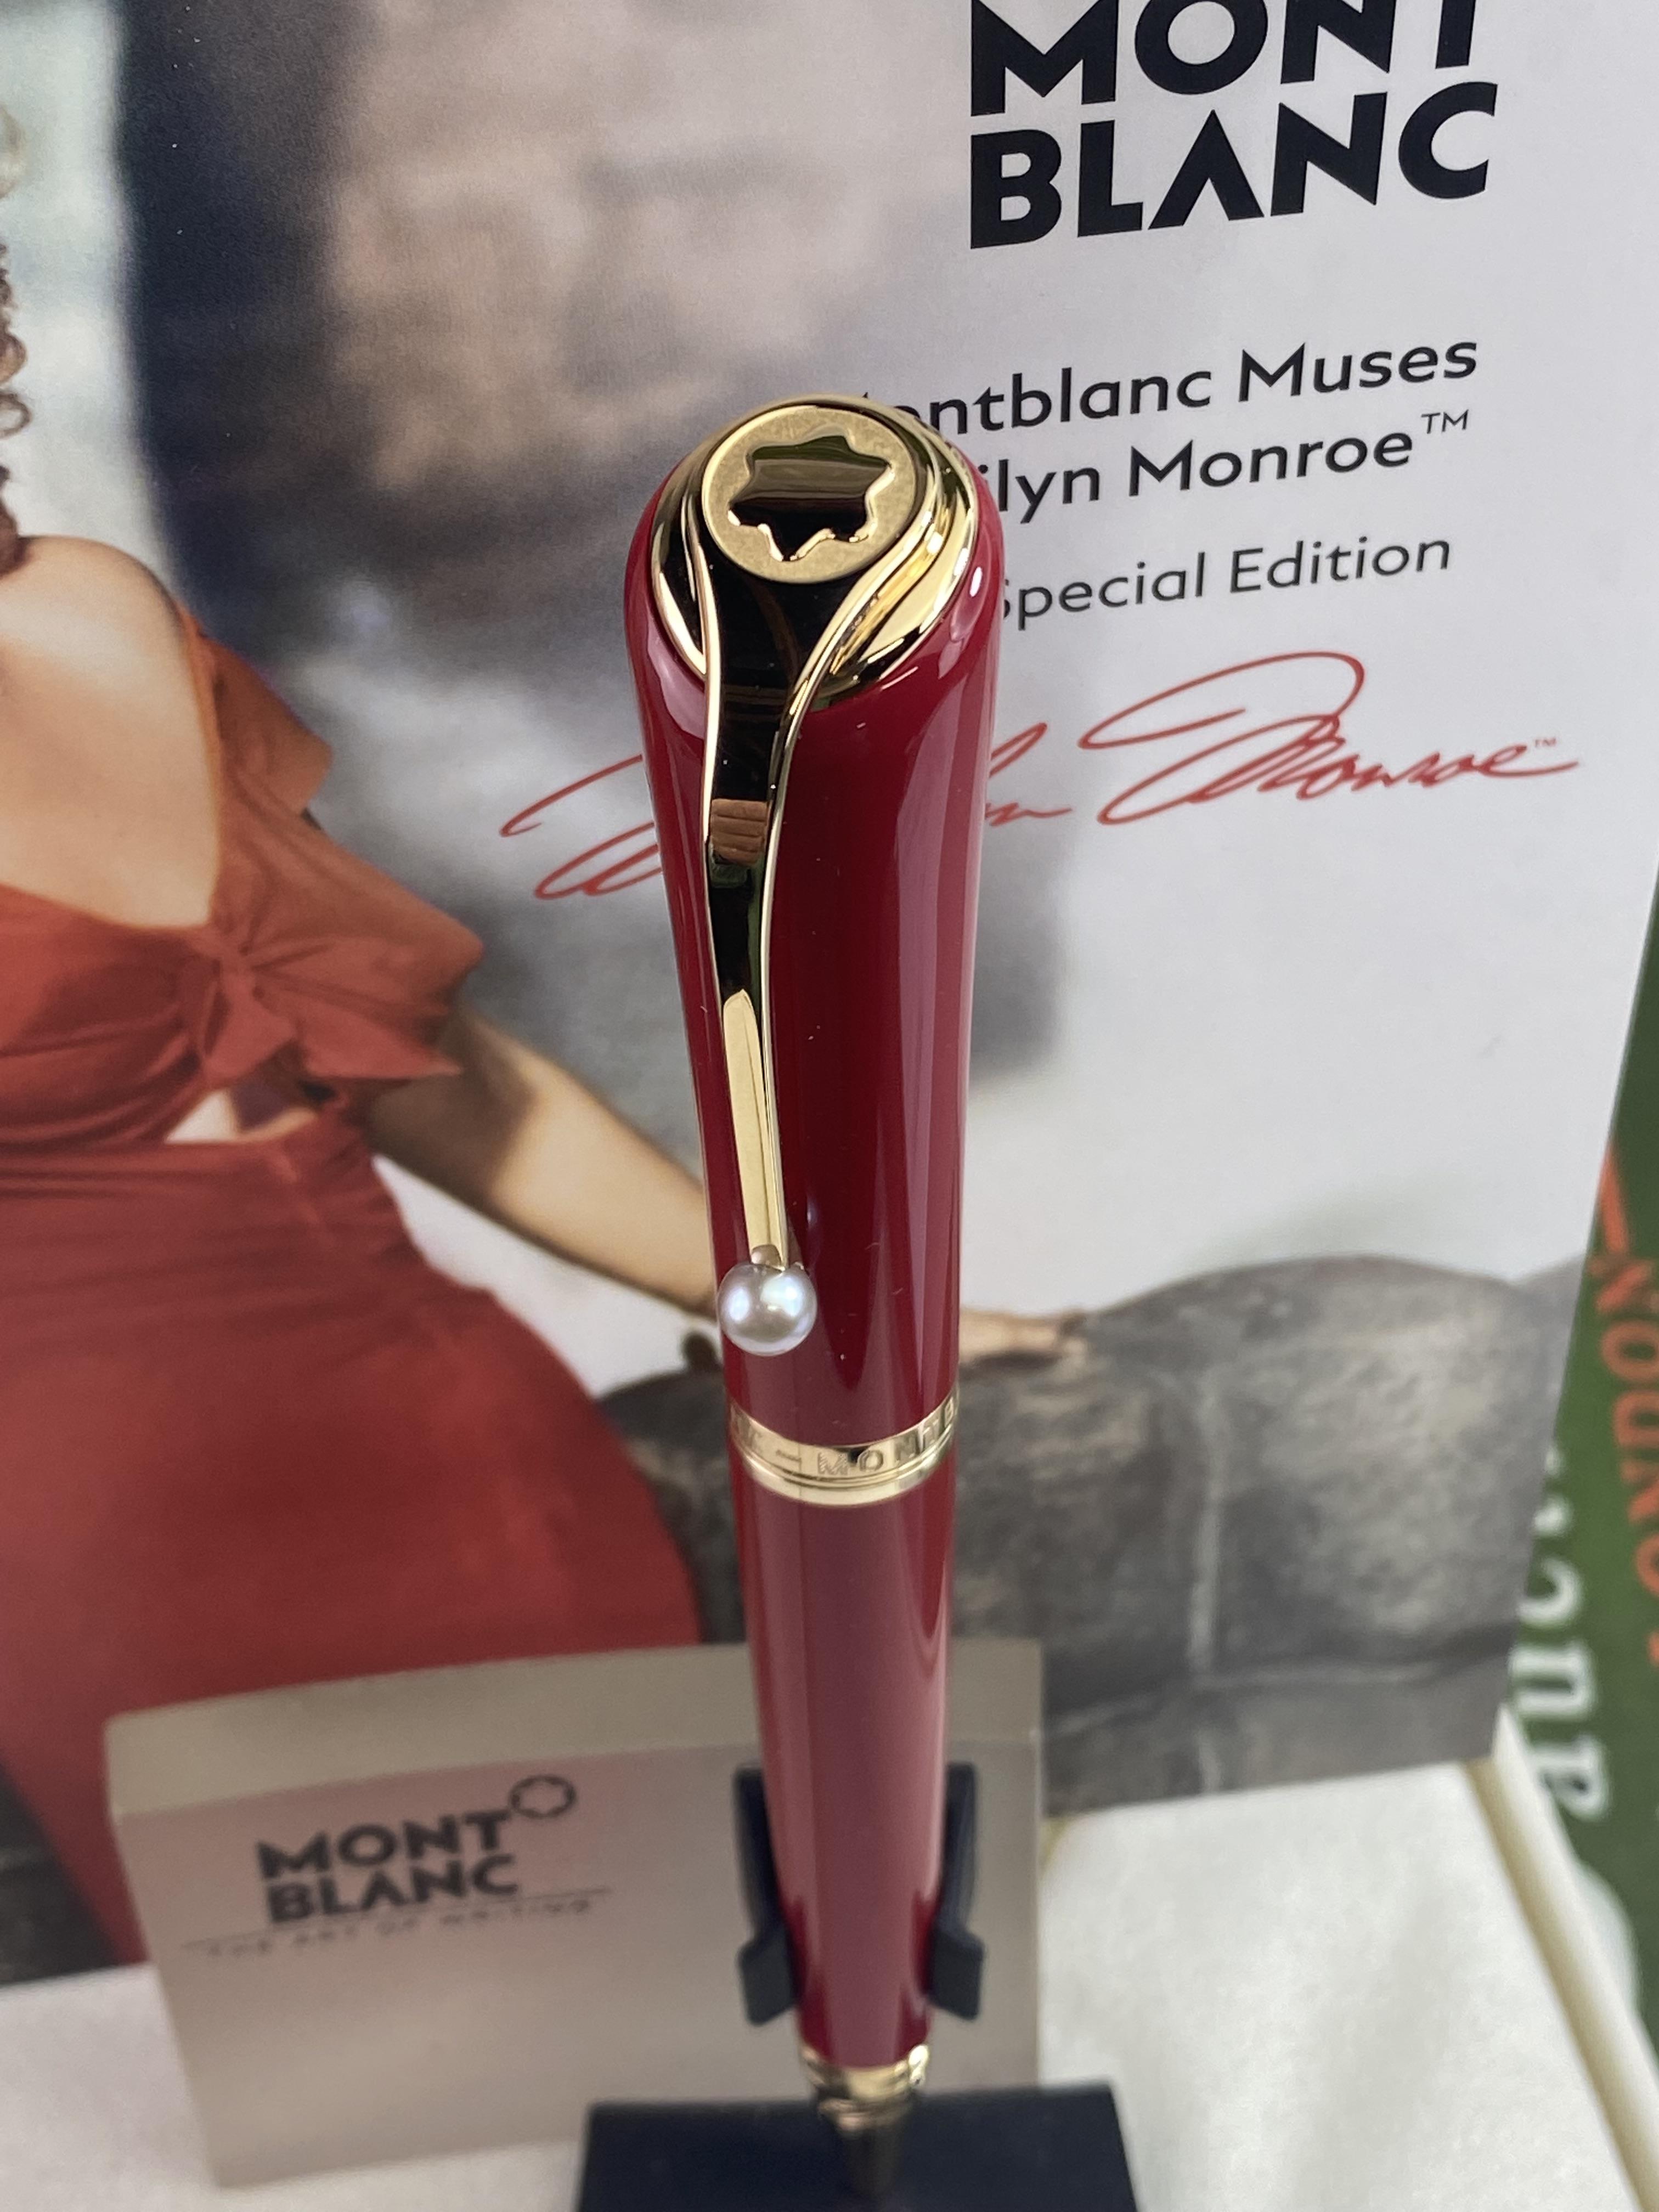 Montblanc Muses Marilyn Monroe Special Edition Ballpoint Pen - Image 2 of 9